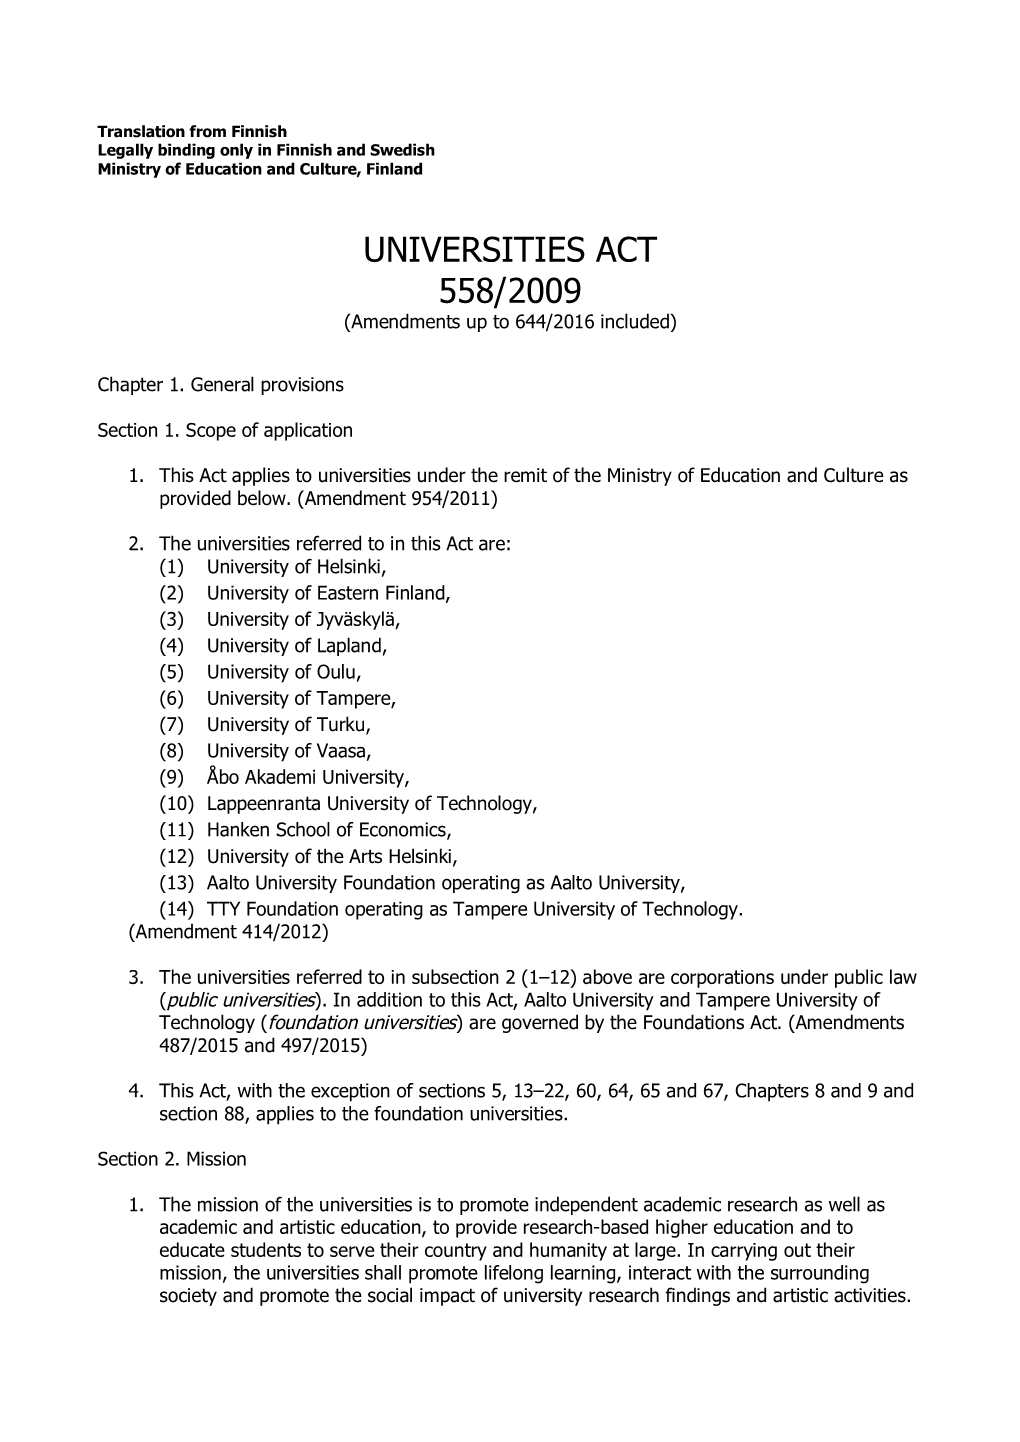 UNIVERSITIES ACT 558/2009 (Amendments up to 644/2016 Included)